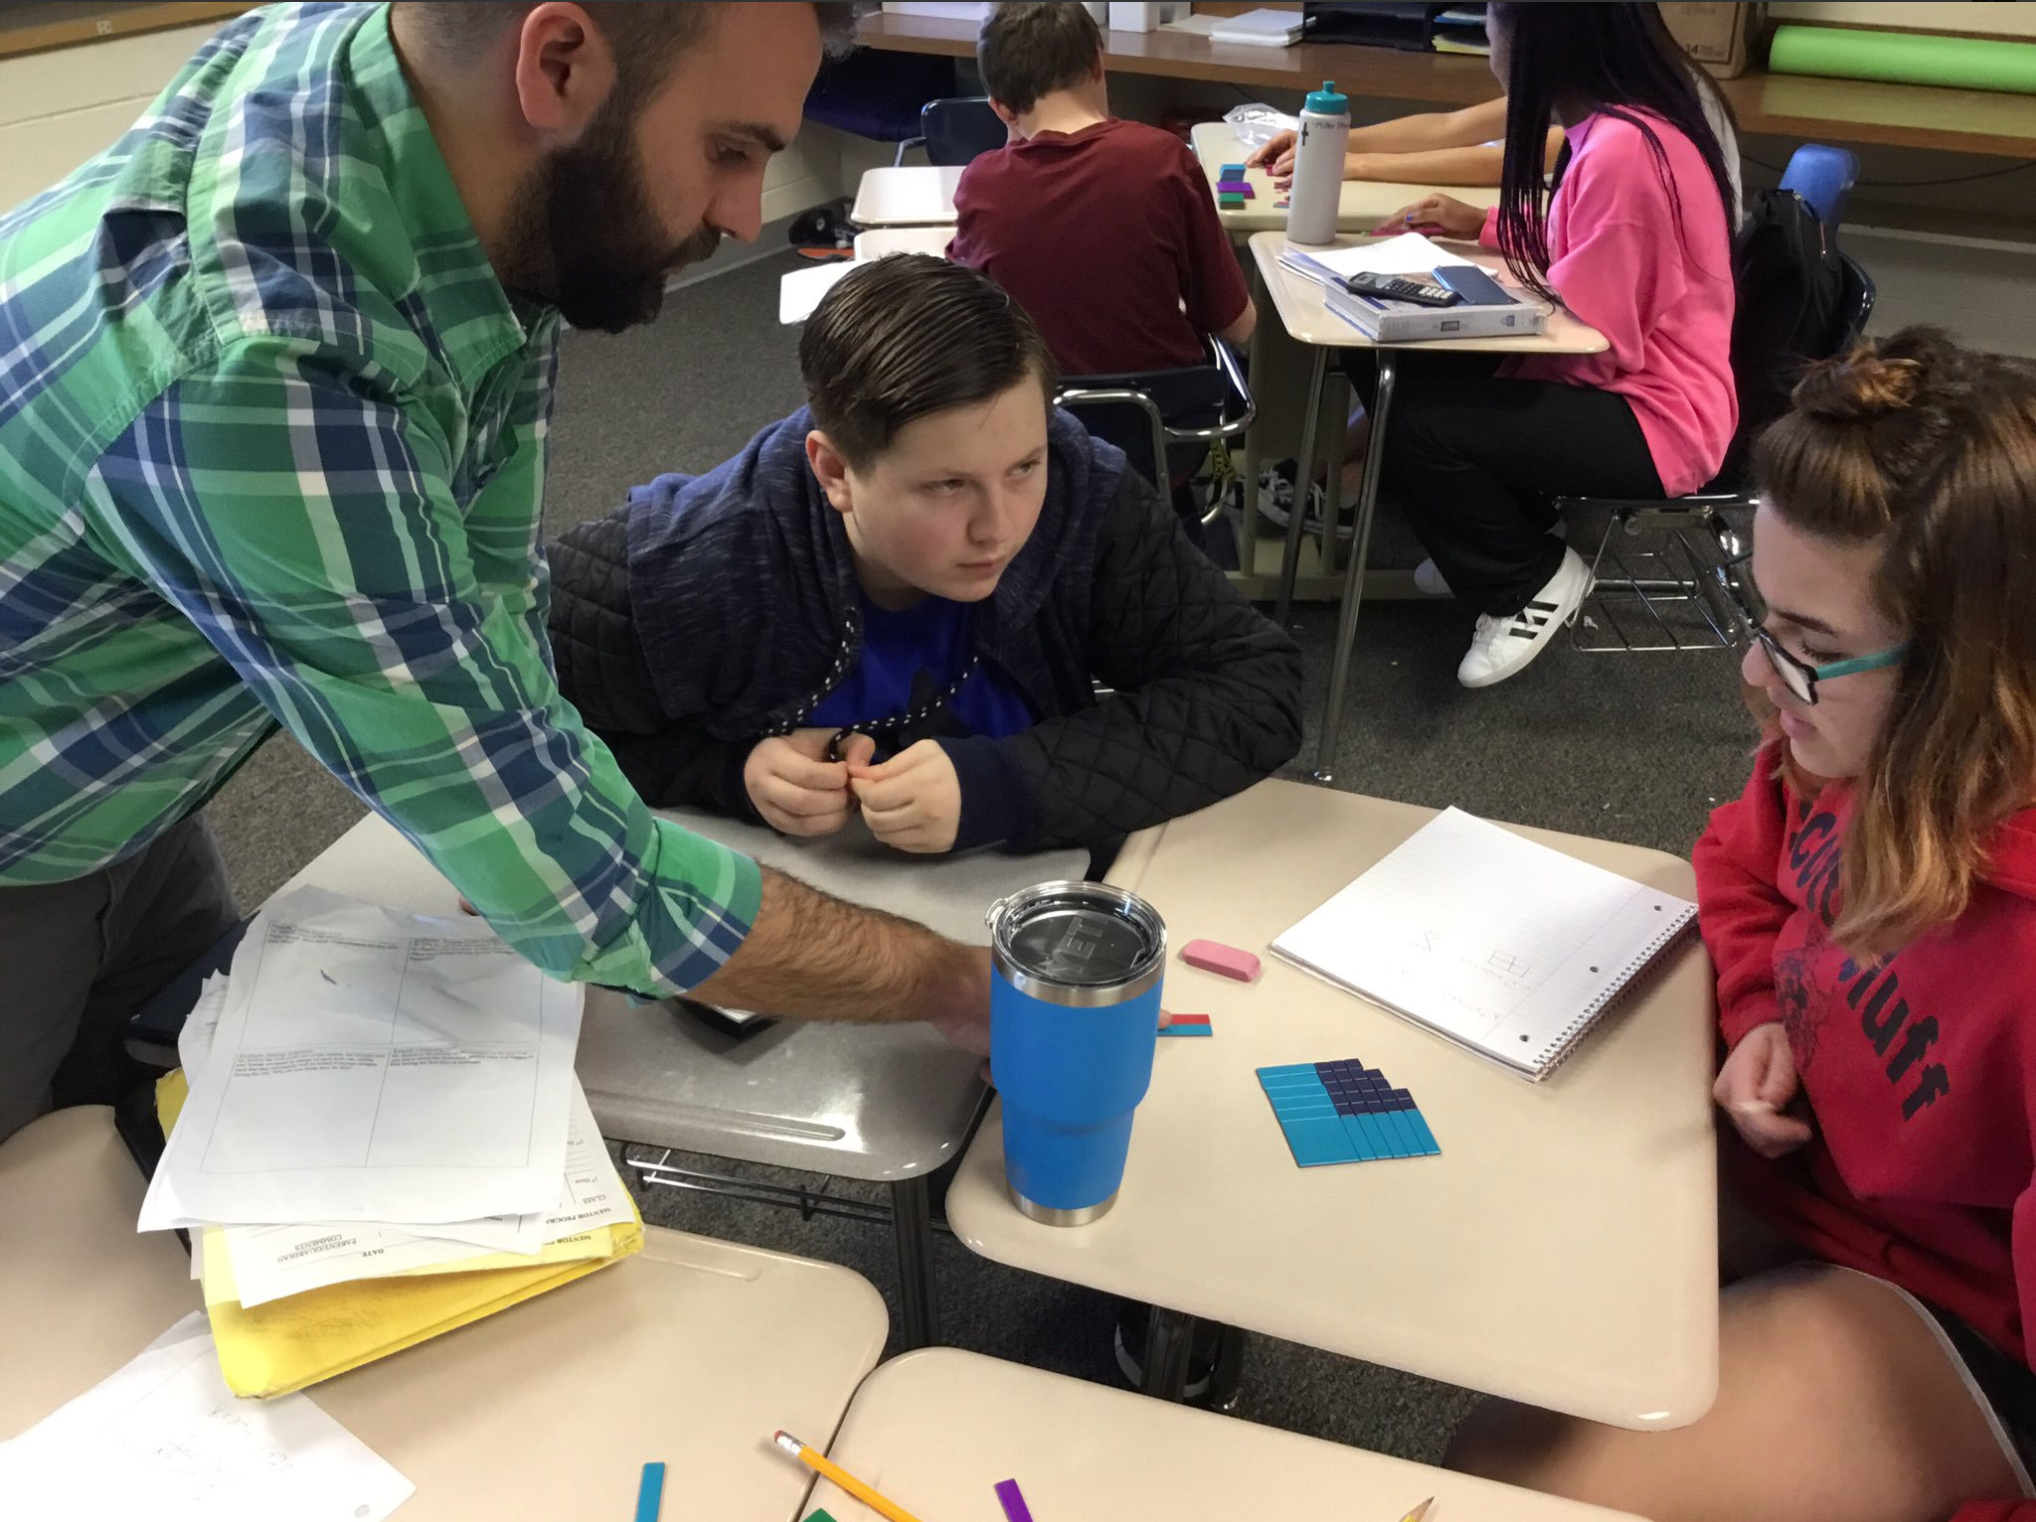 Tyler works with two students in his  math class using visuals.